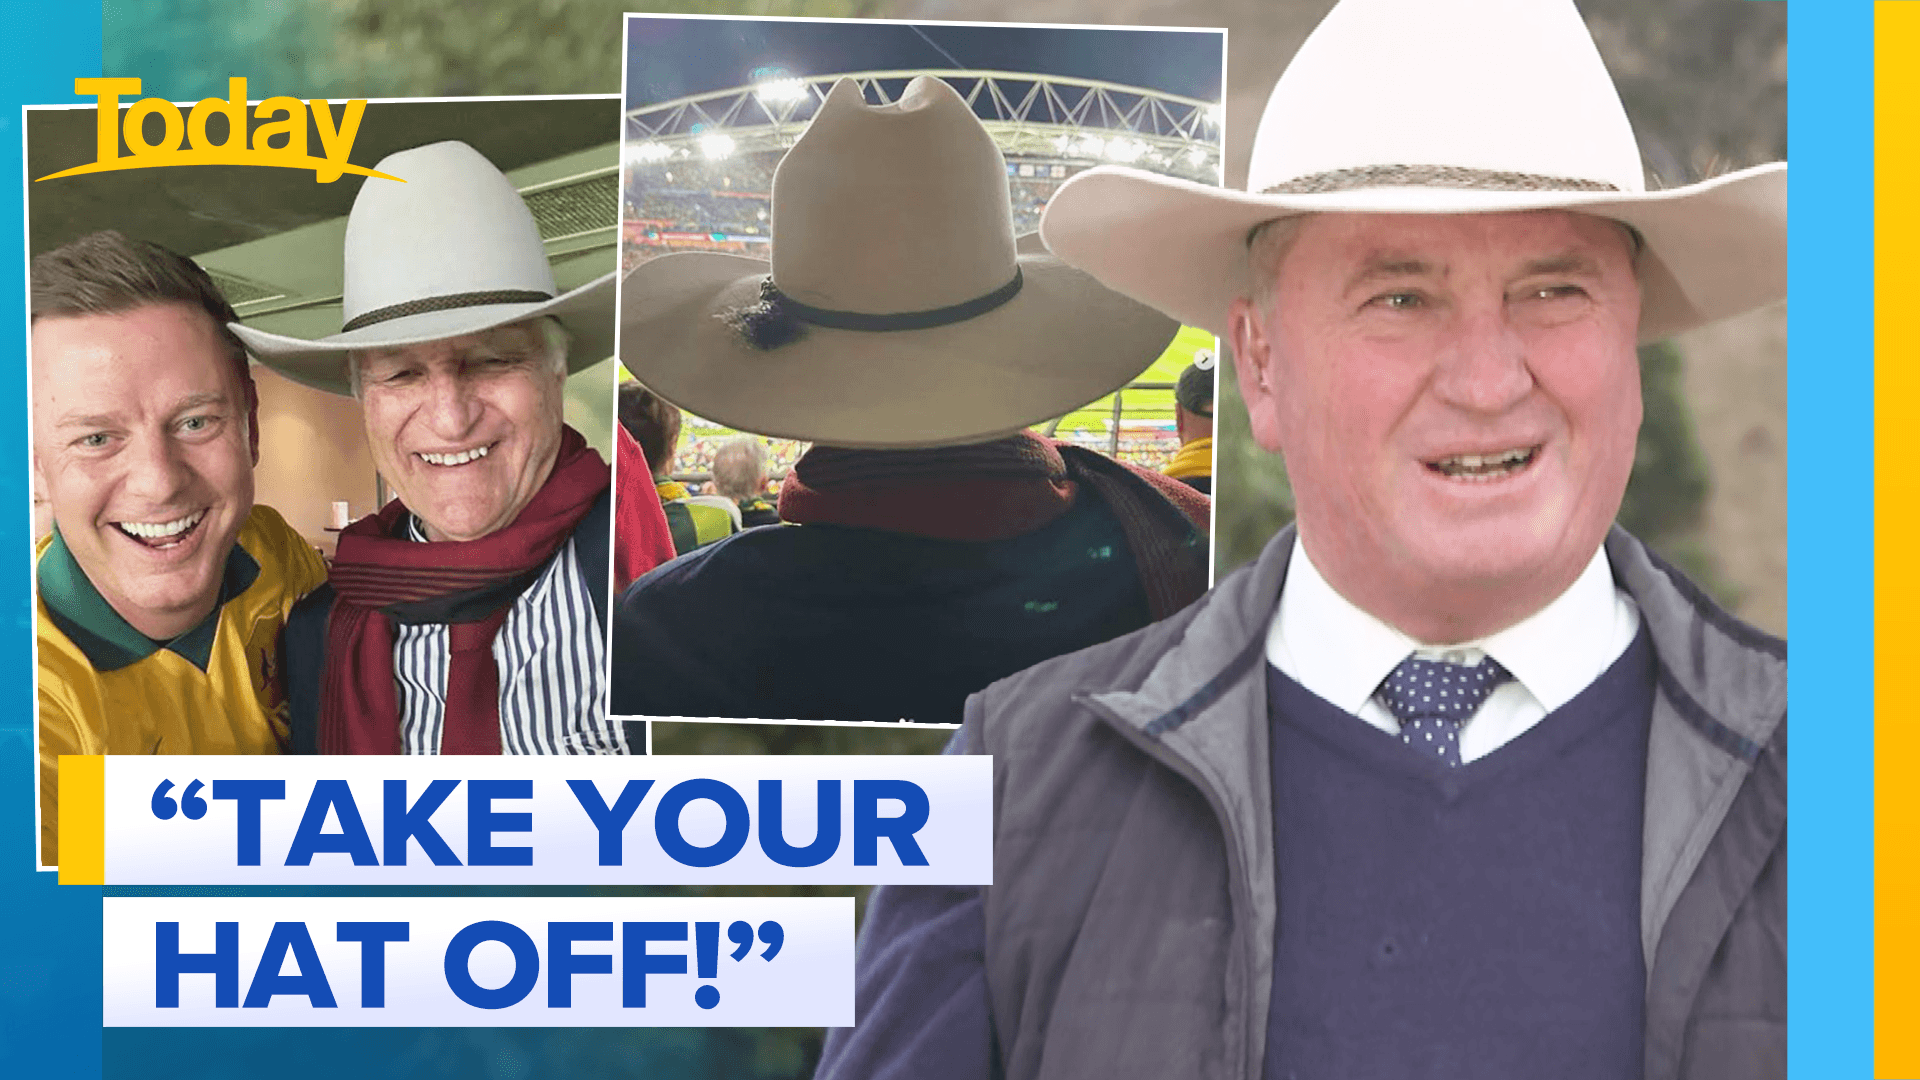 Bob Katter called out over hat blocking view at Matildas game